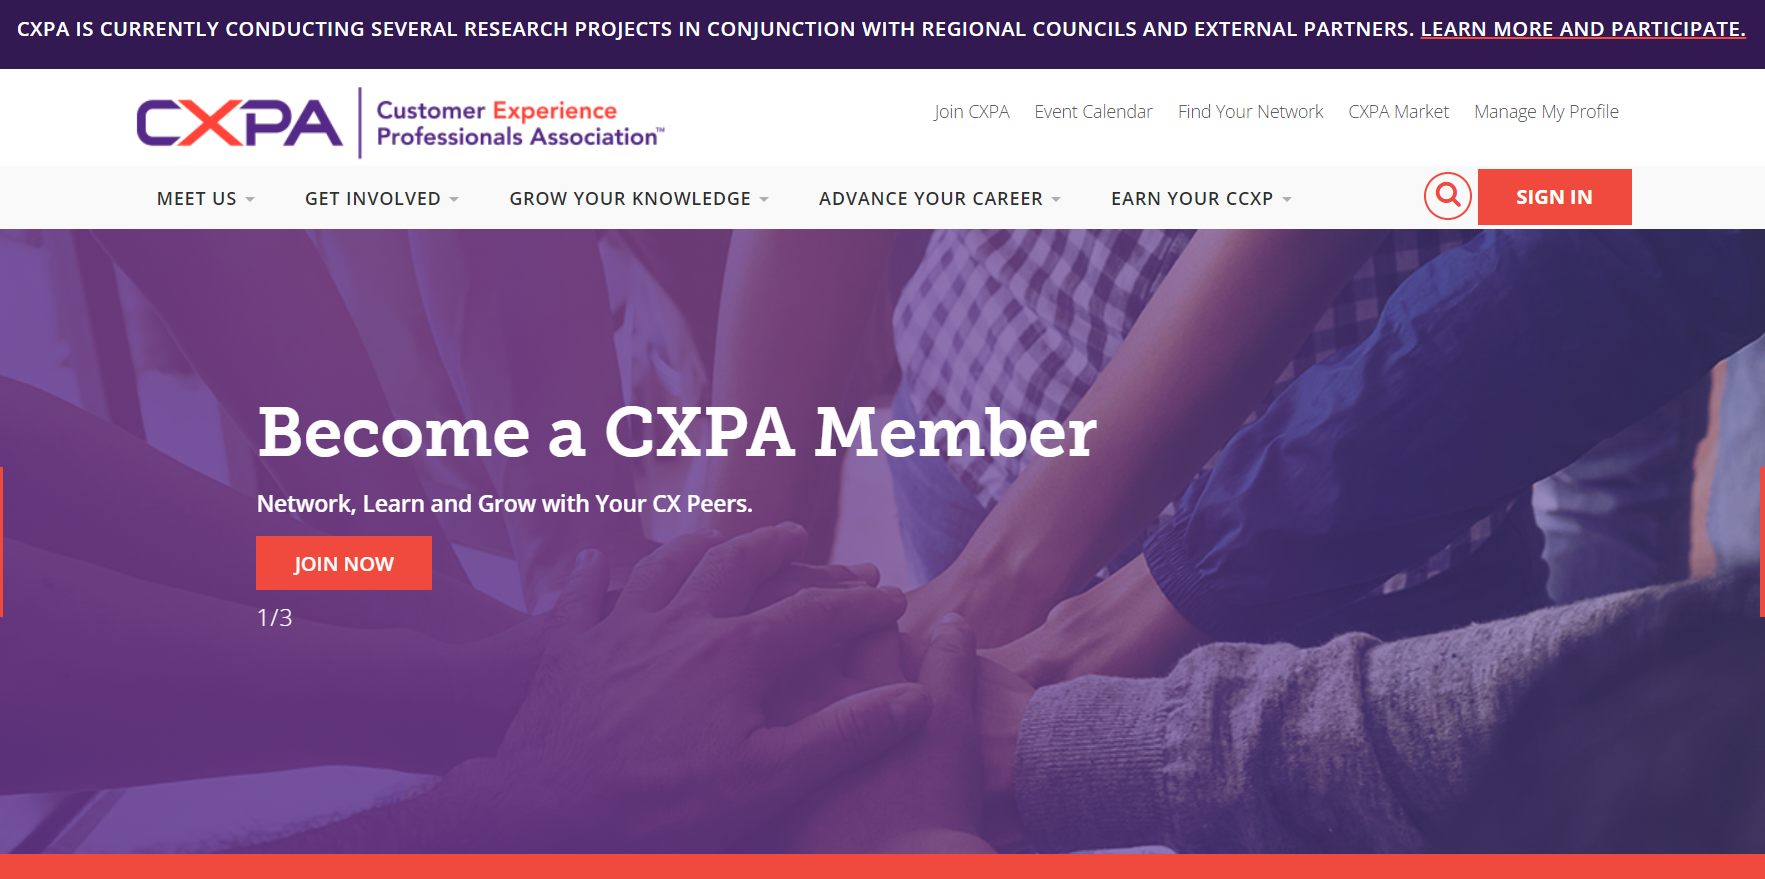 CXPA Certified Customer Experience Professional (CCXP) certification